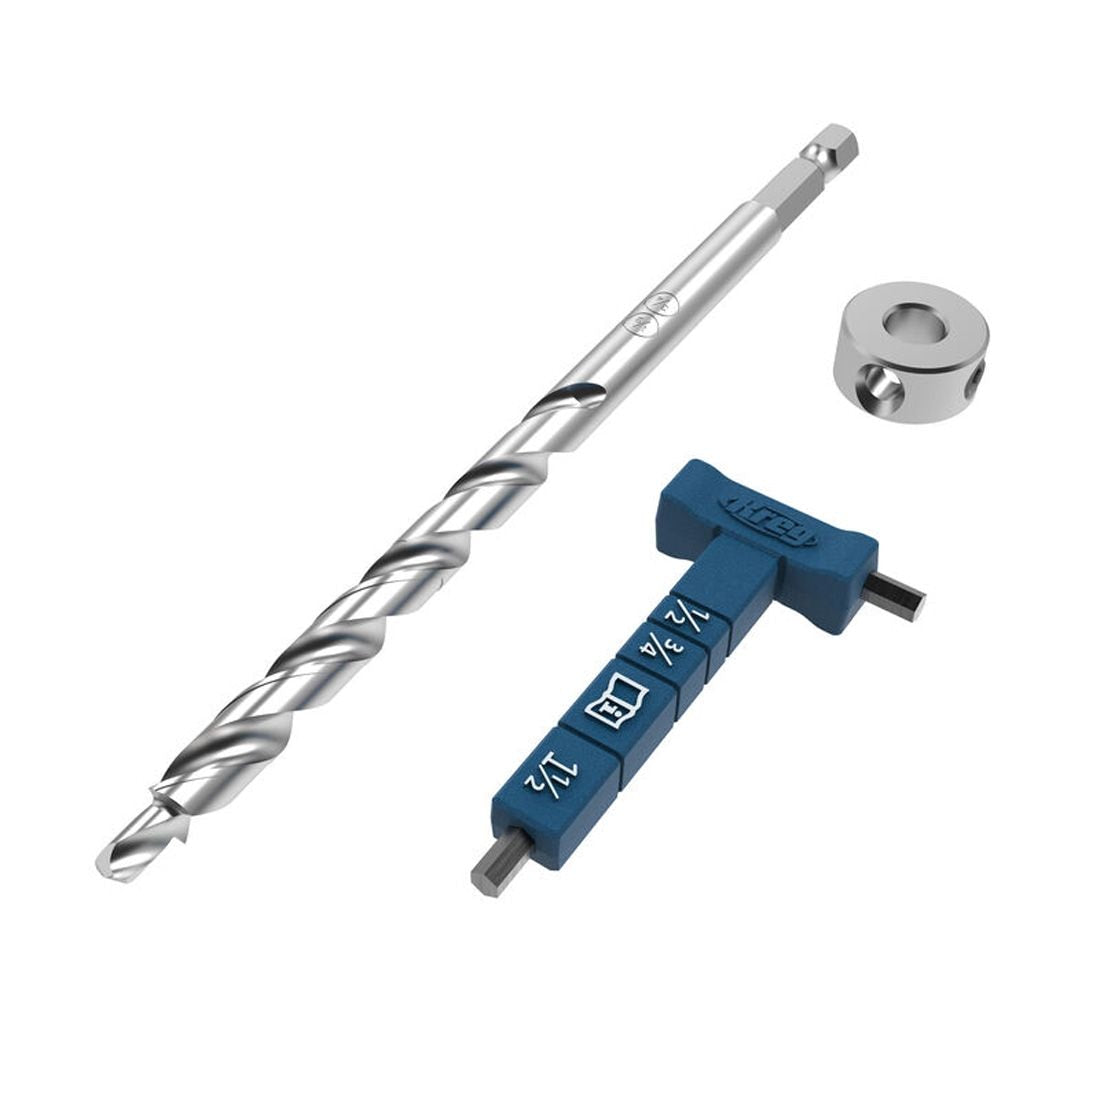 Kreg Micro-Pocket Drill Bit with Stop Collar & Hex Wrench